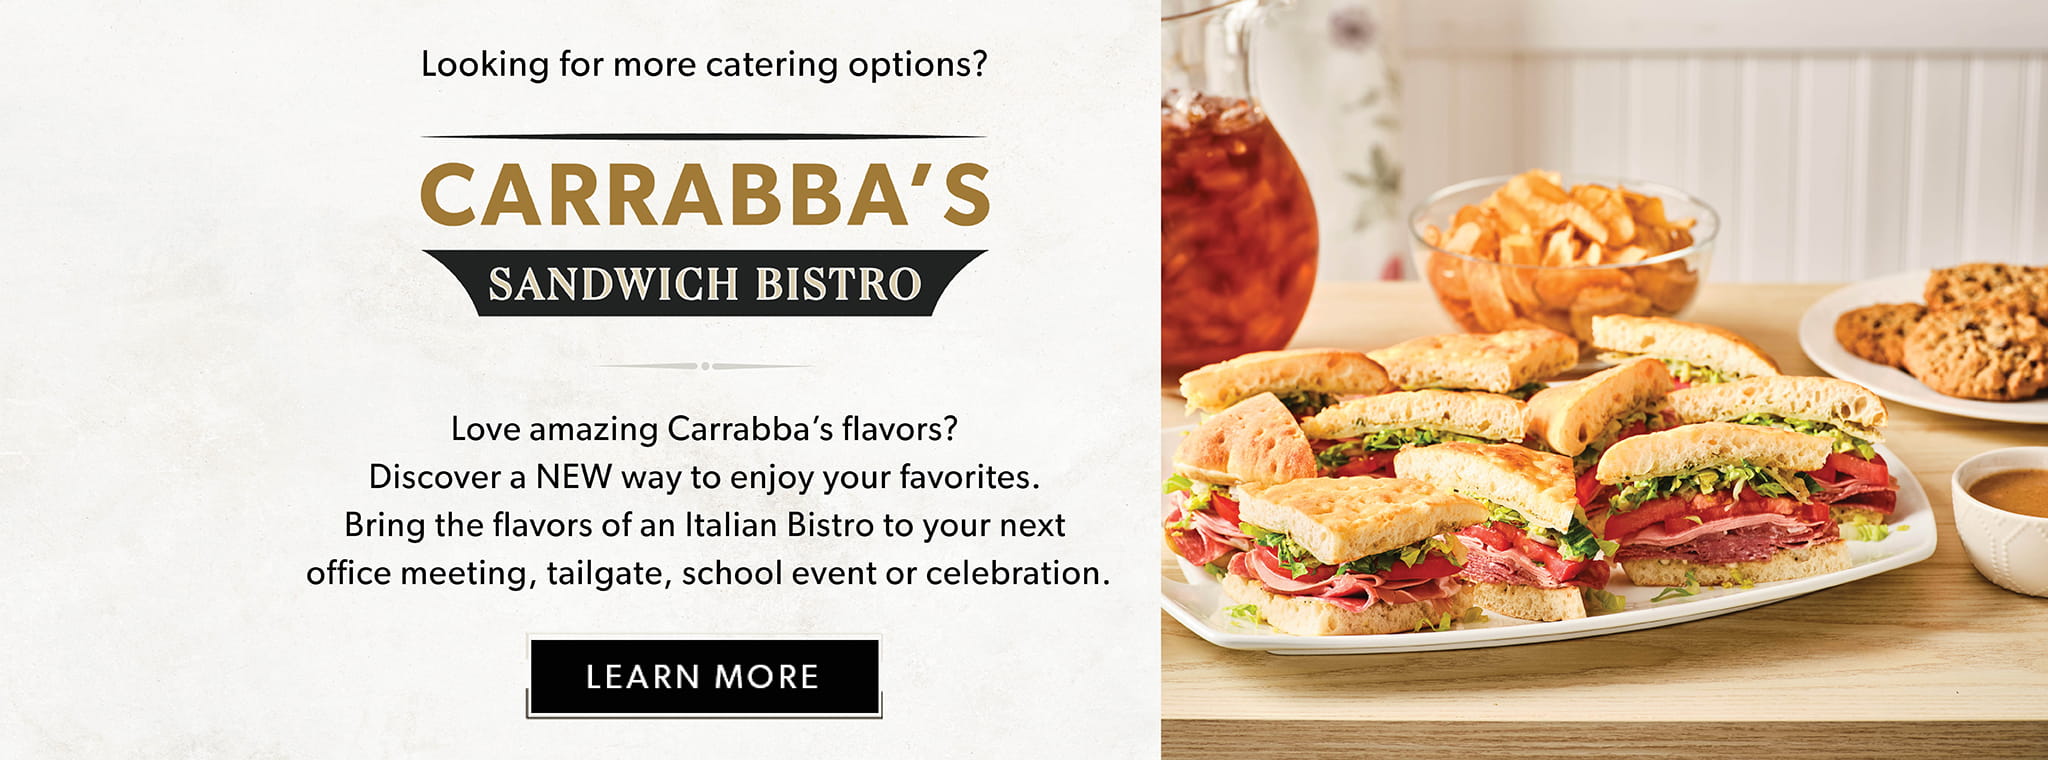 Looking for more catering options?  Carrabba's Sandwich Bistro